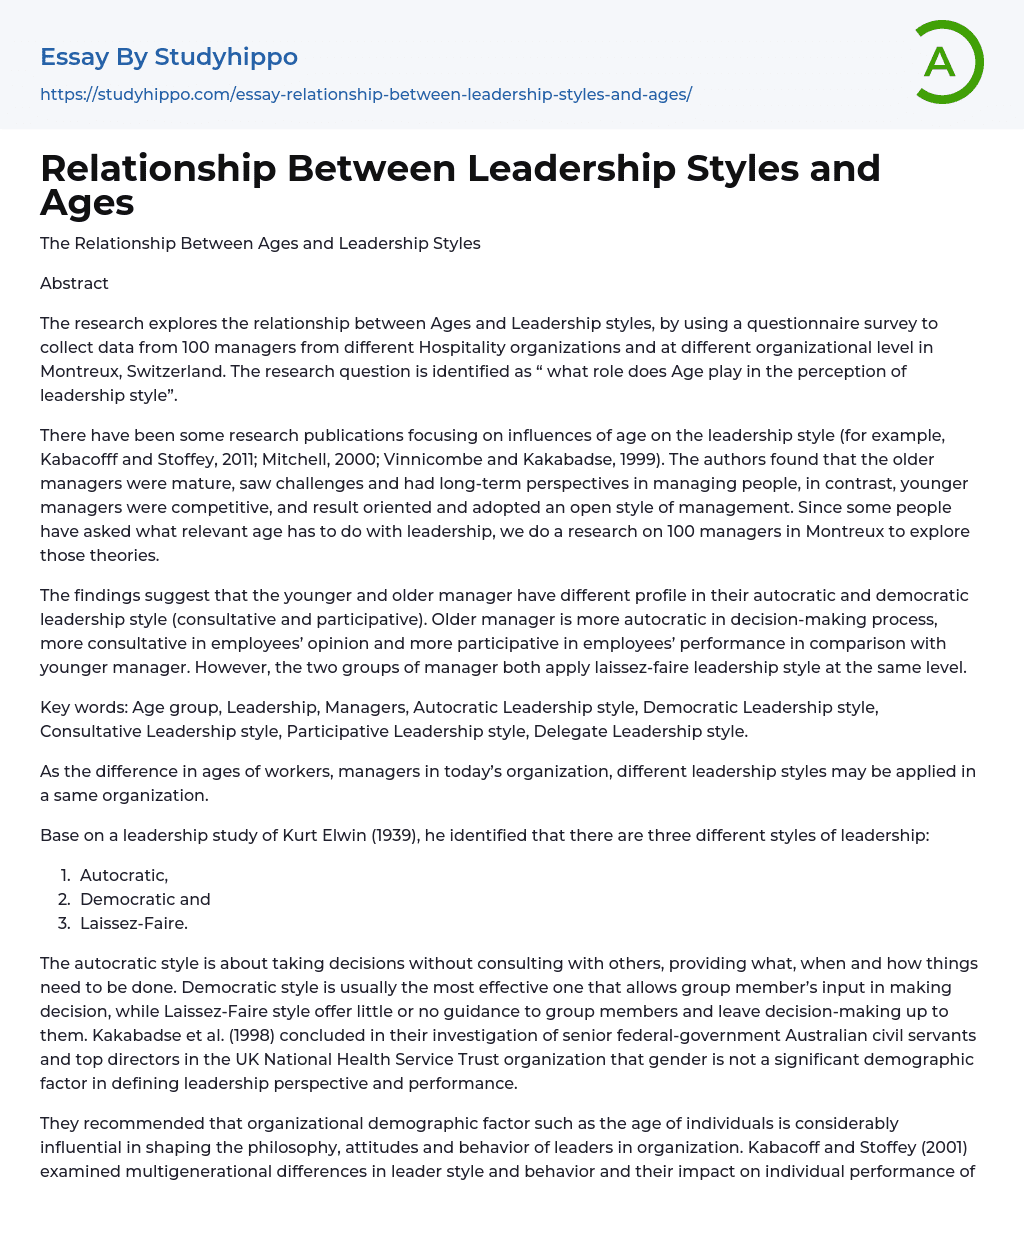 Relationship Between Leadership Styles and Ages Essay Example